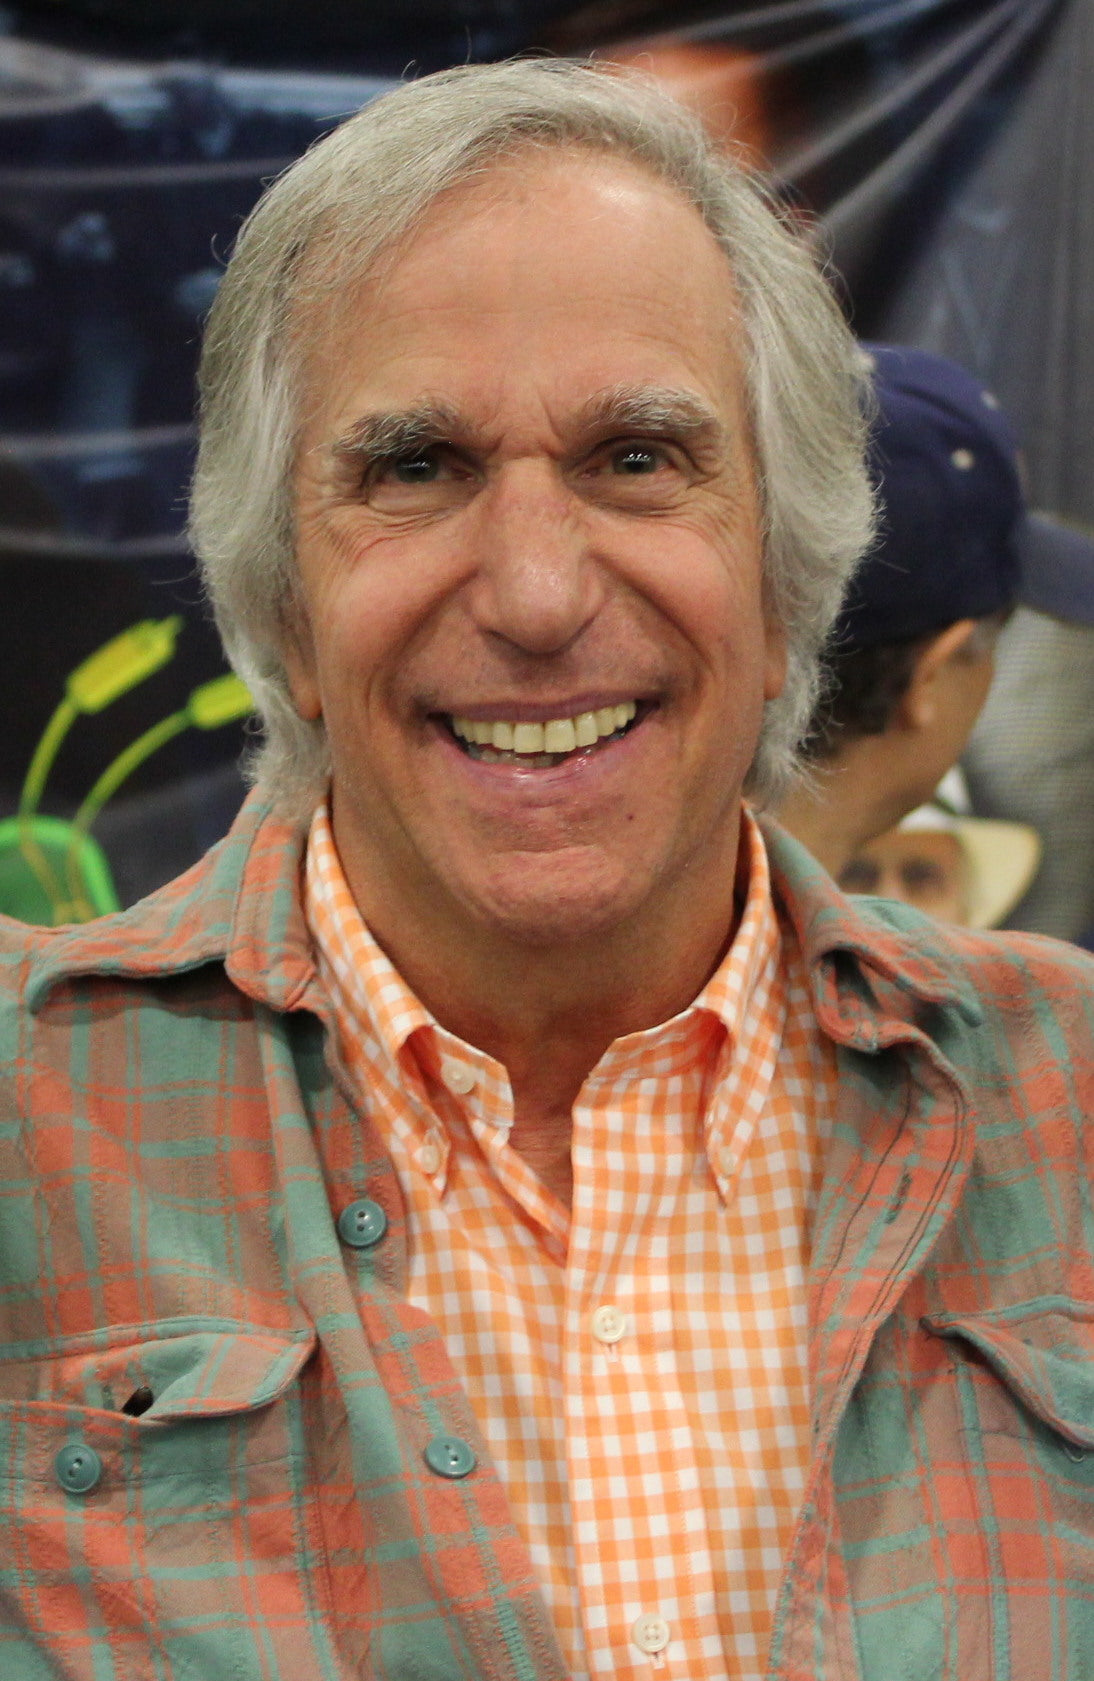 Henry Winkler Autograph Signing-Powers Sports Memorabilia